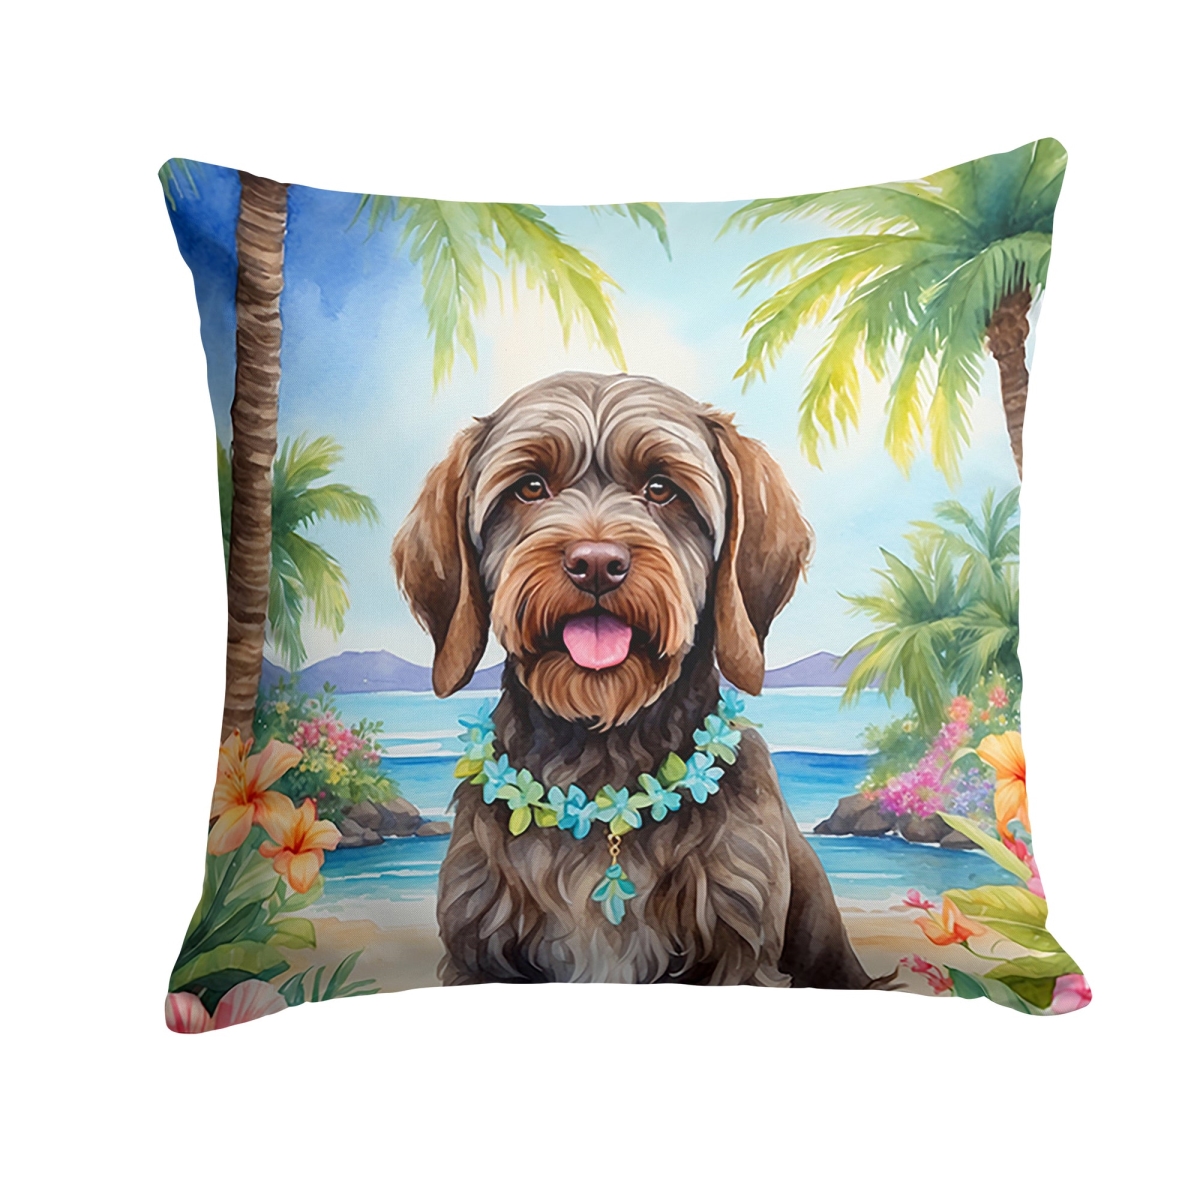 Picture of Carolines Treasures DAC6539PW1818 18 x 18 in. Unisex Wirehaired Pointing Griffon Luau Throw Pillow